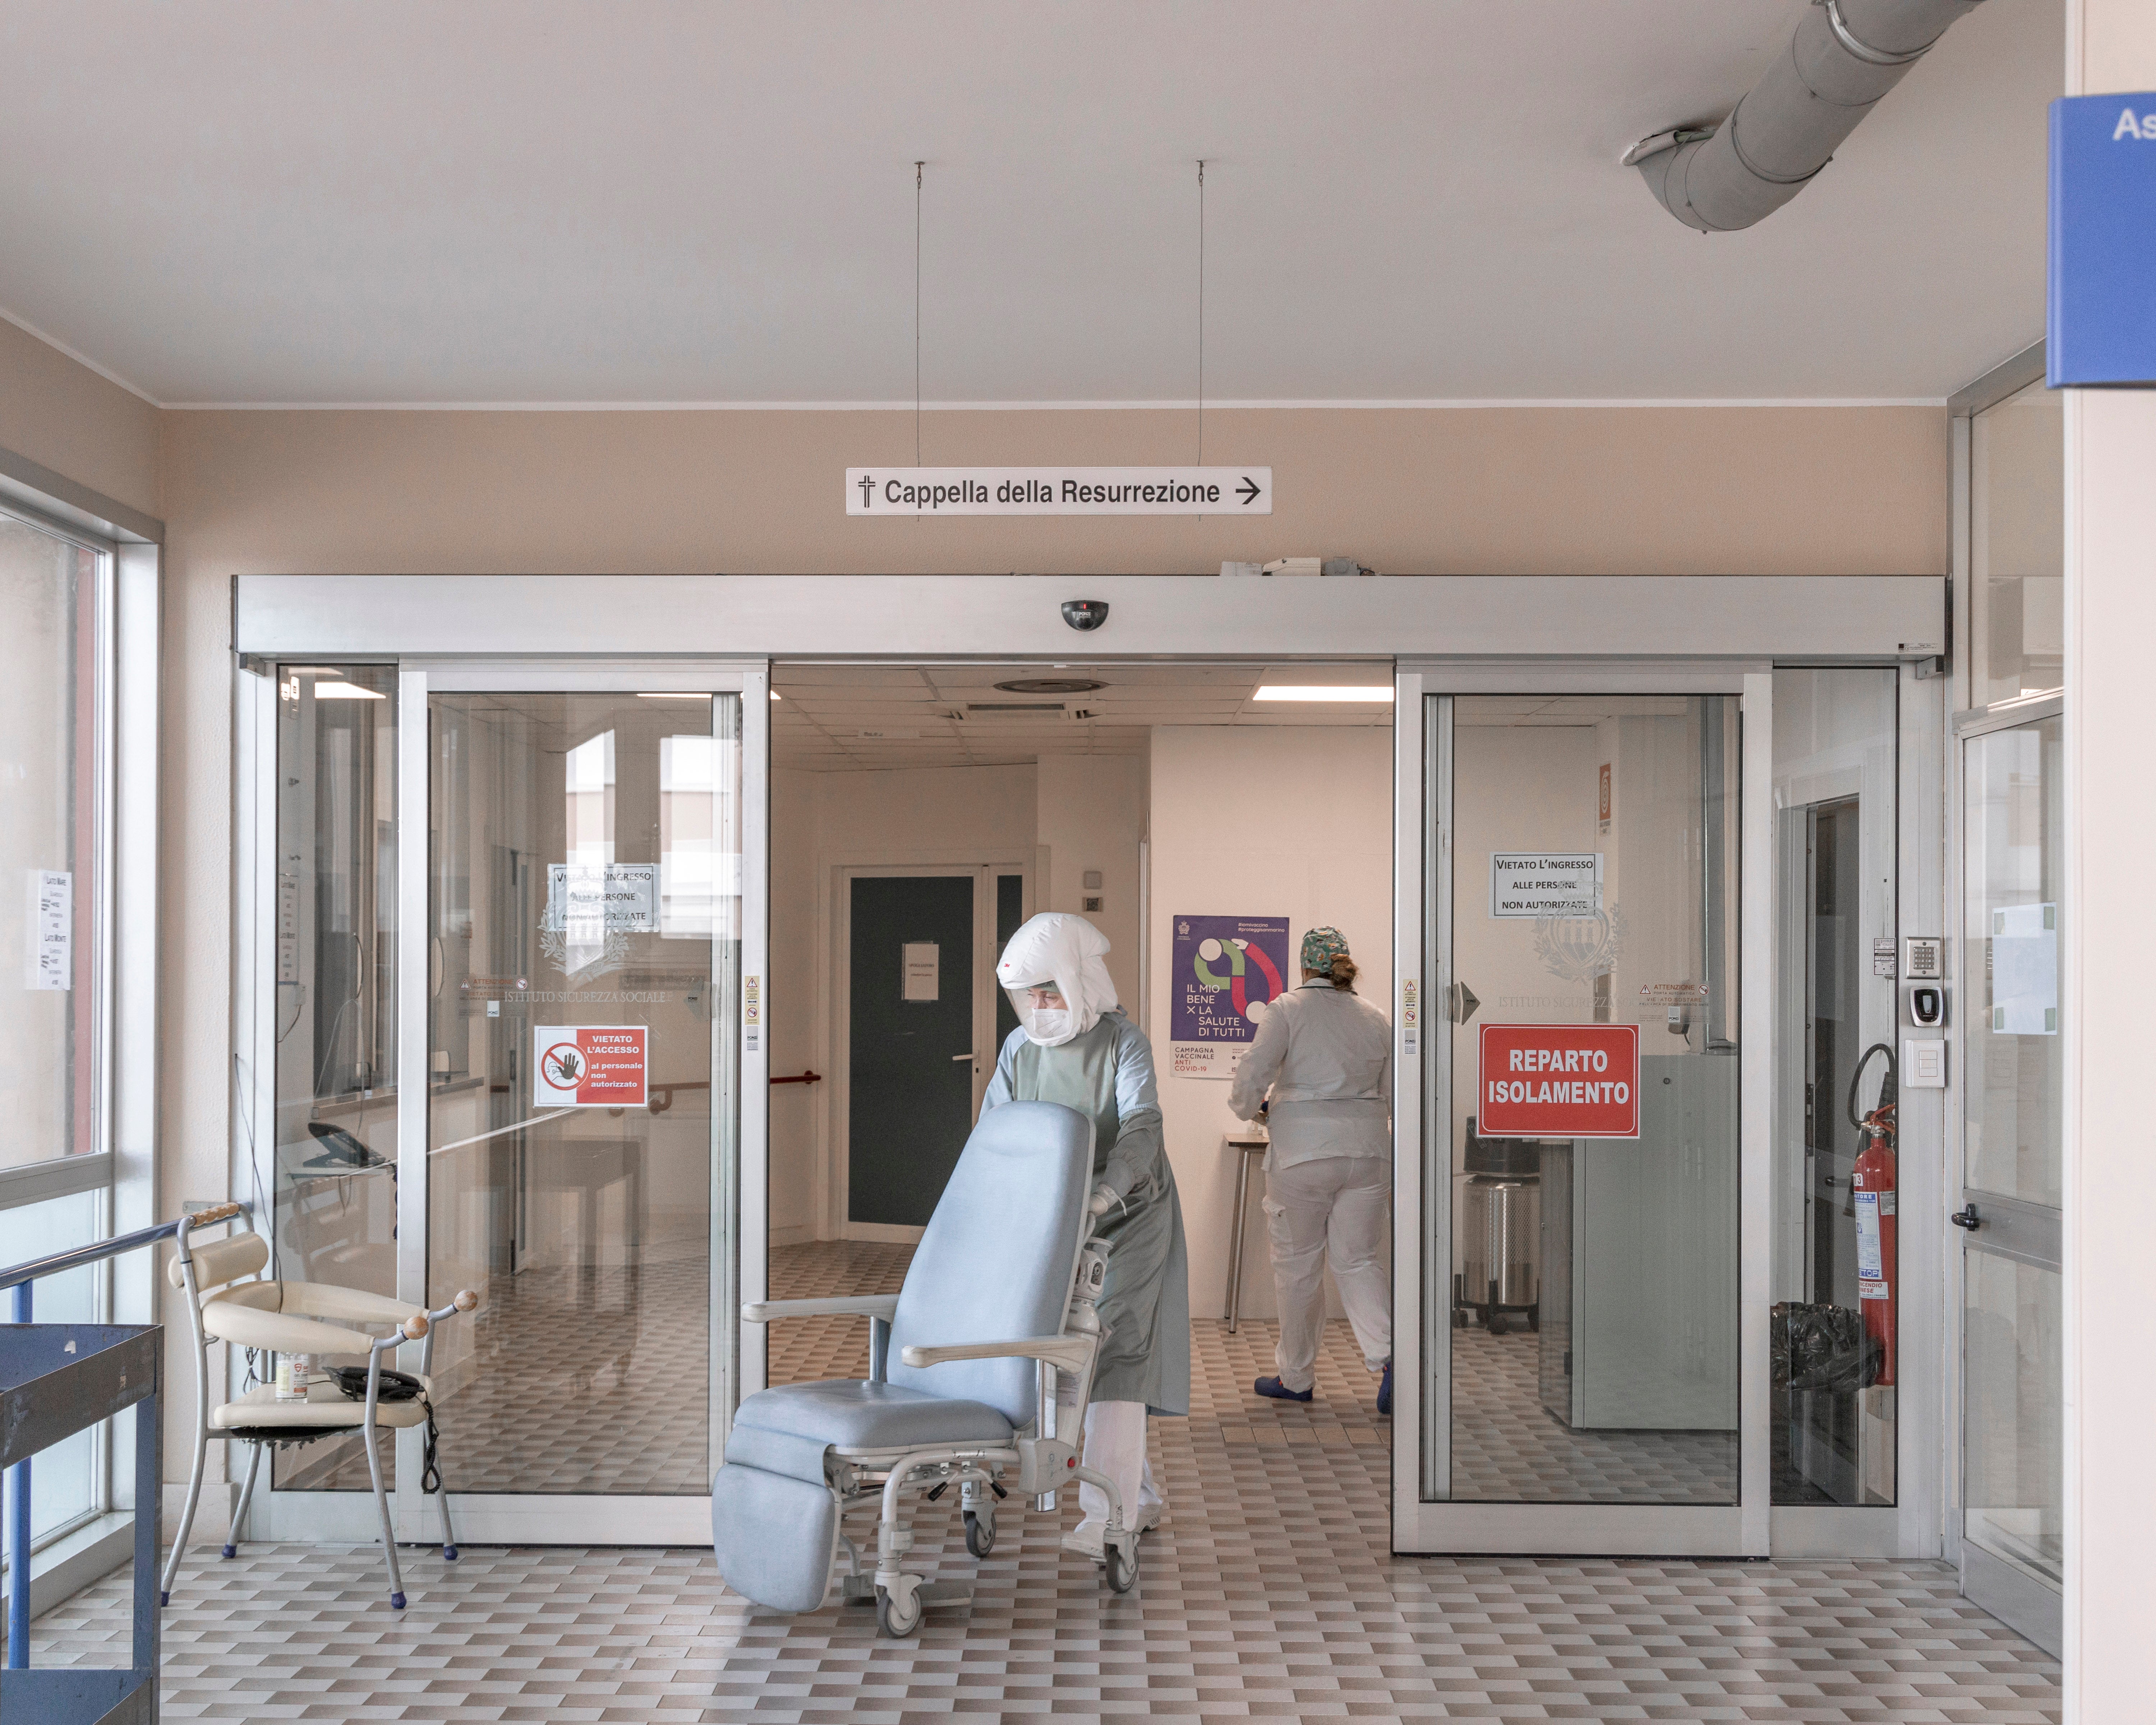 Almost all the intensive care beds are occupied in the San Marino hospital, though officials say that without vaccinations, the situation would be much worse